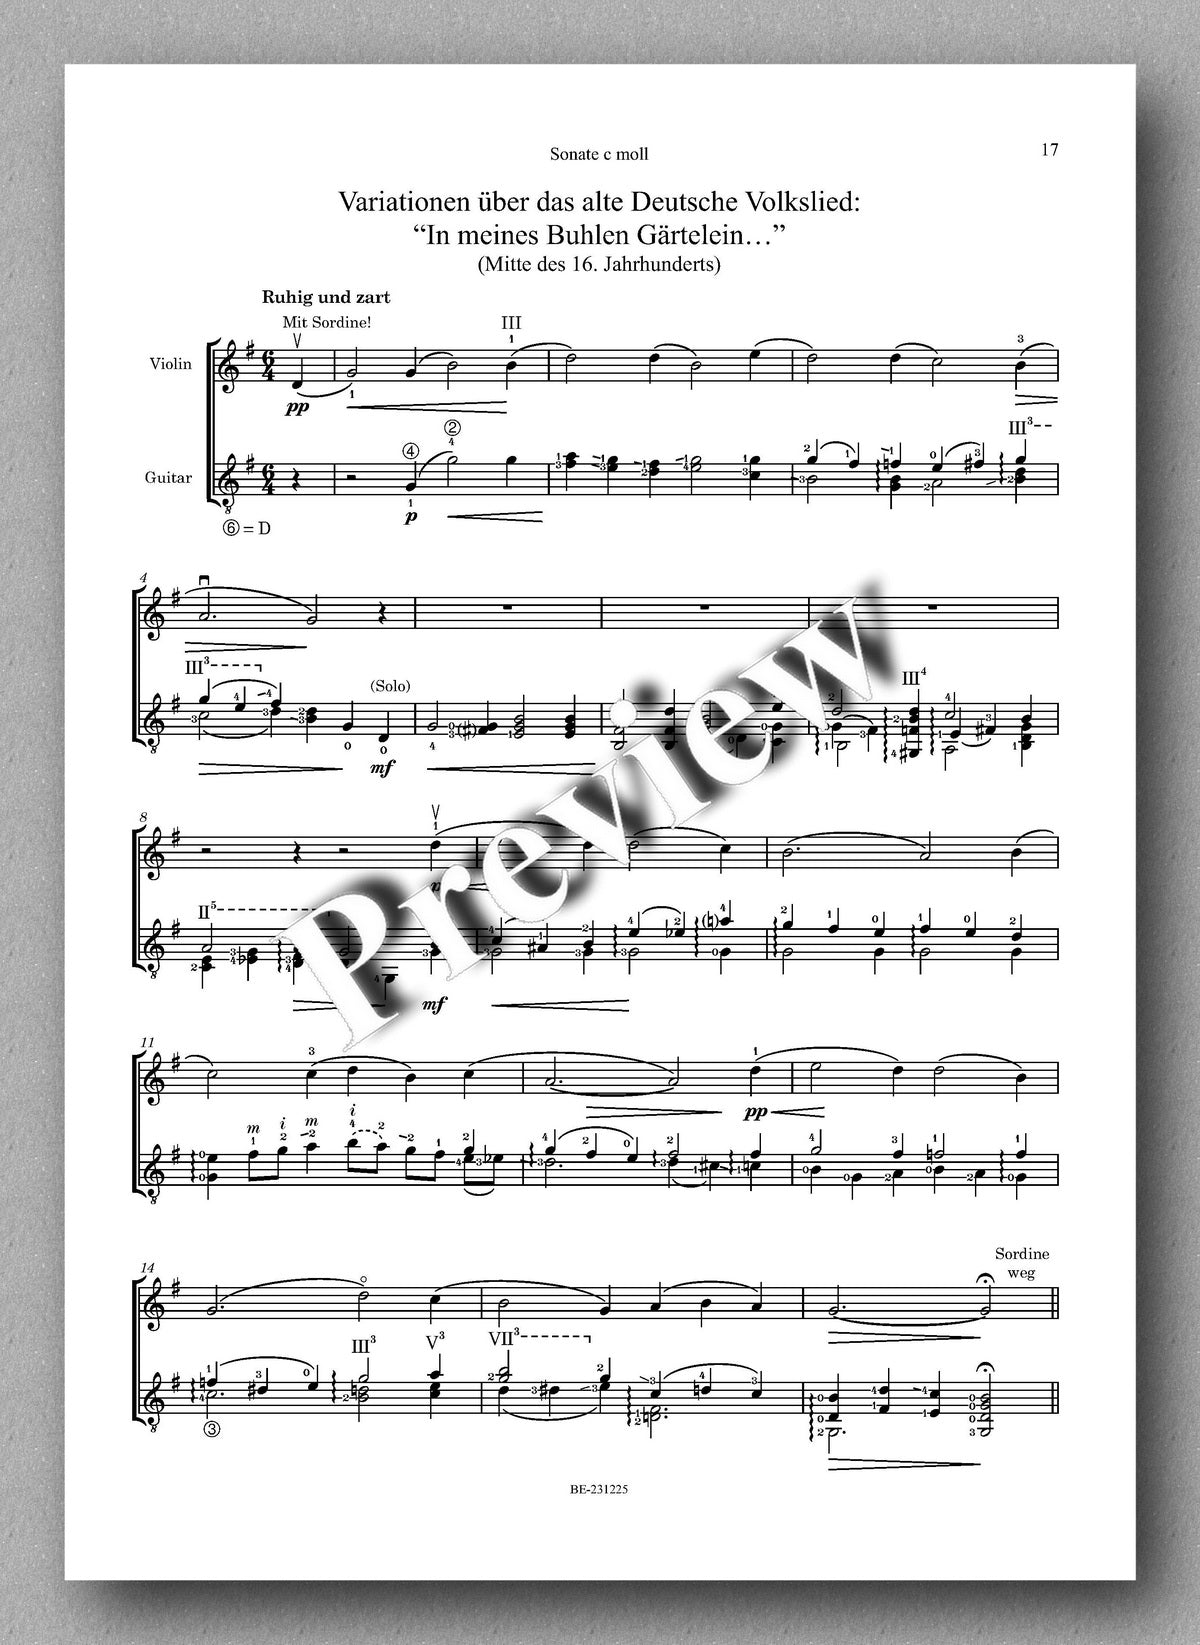 Ferdinand Rebay, Sonate in c moll - preview of the music score 2